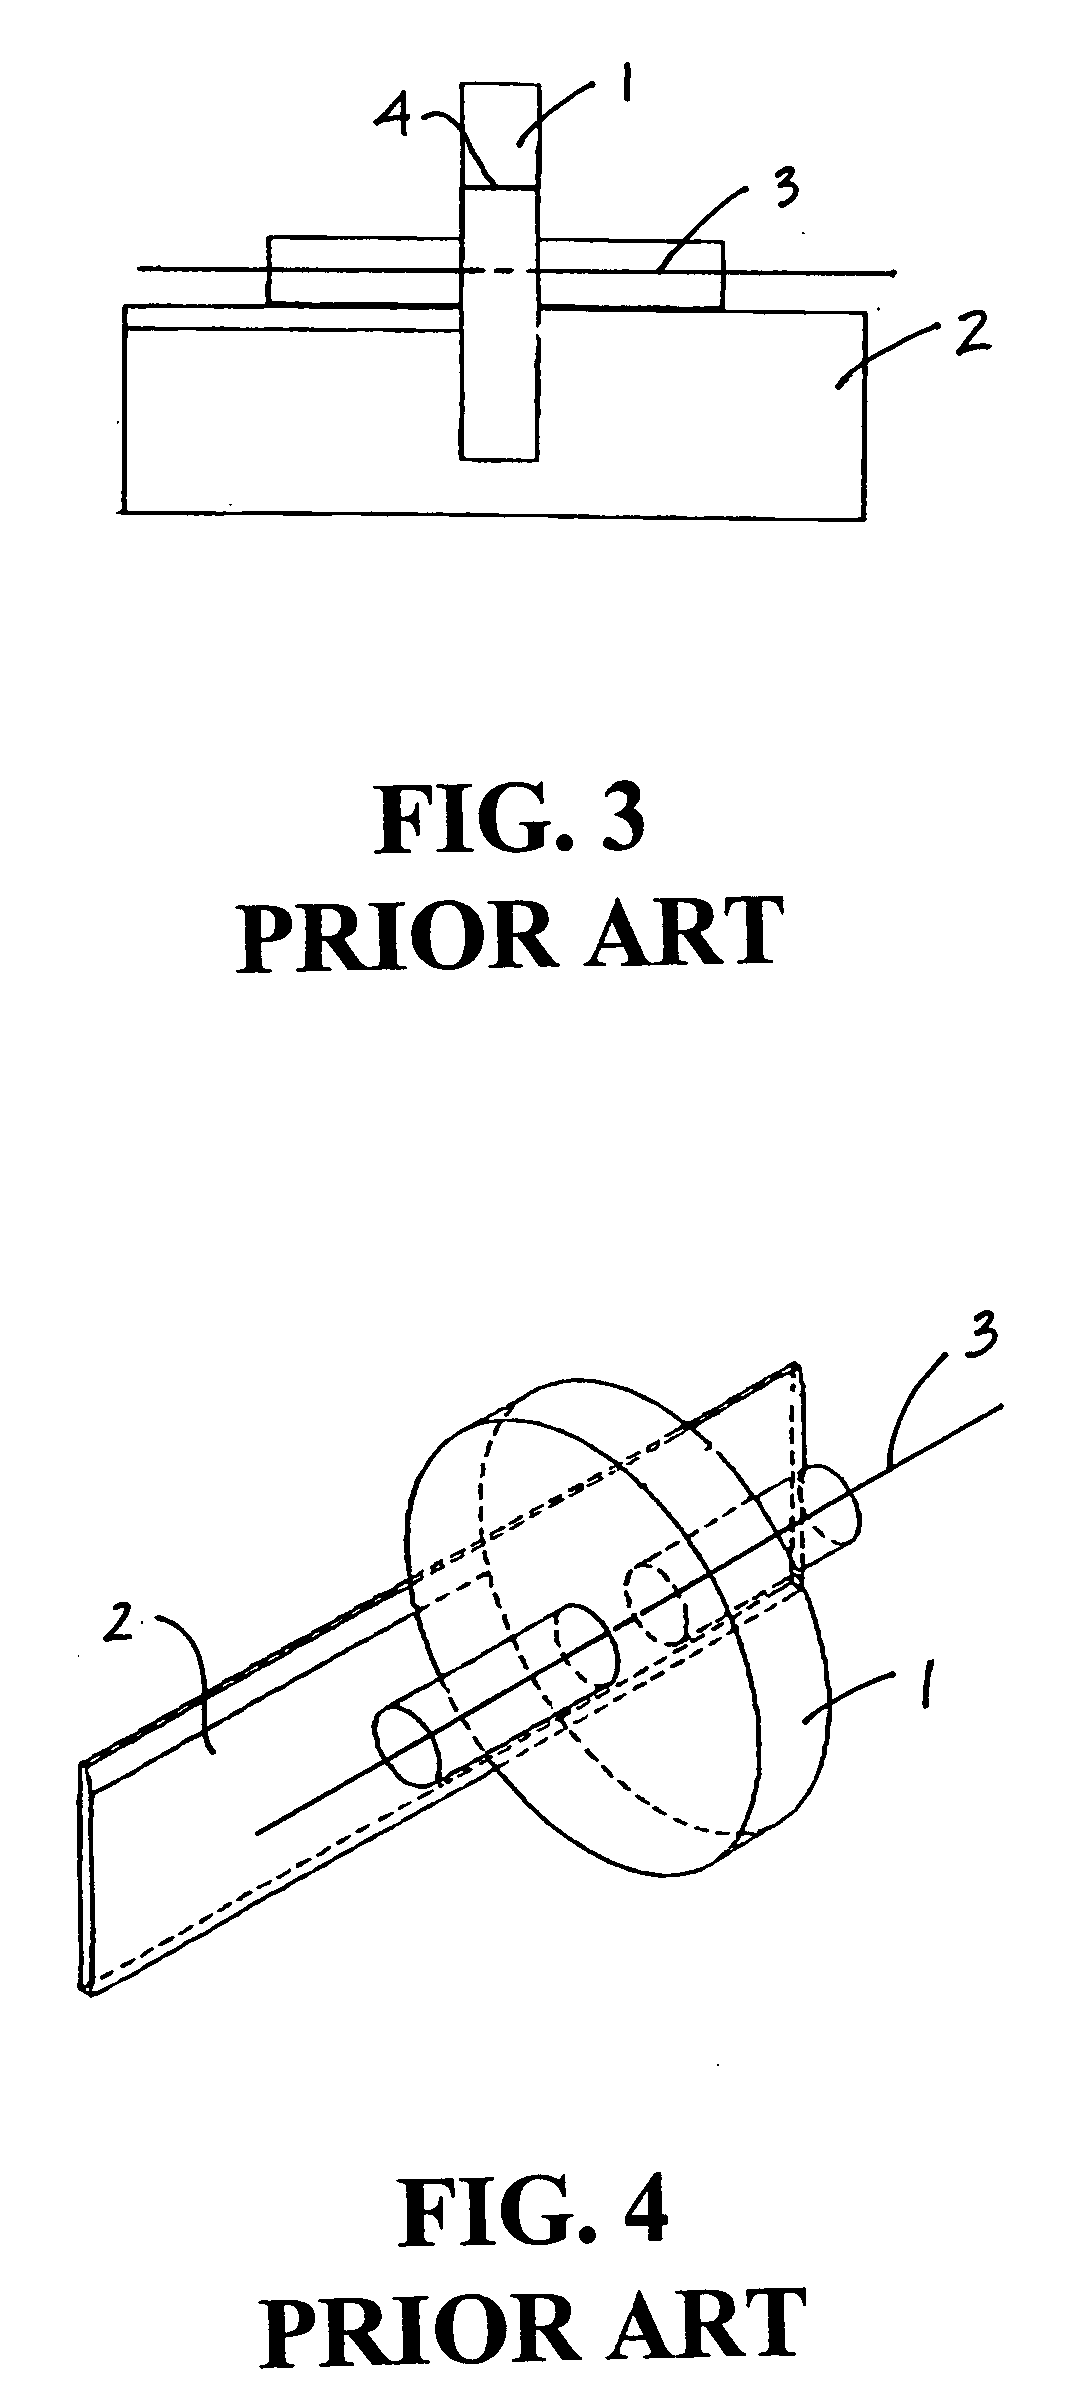 Method for forming a cutting edge along an edge portion of a blade stock